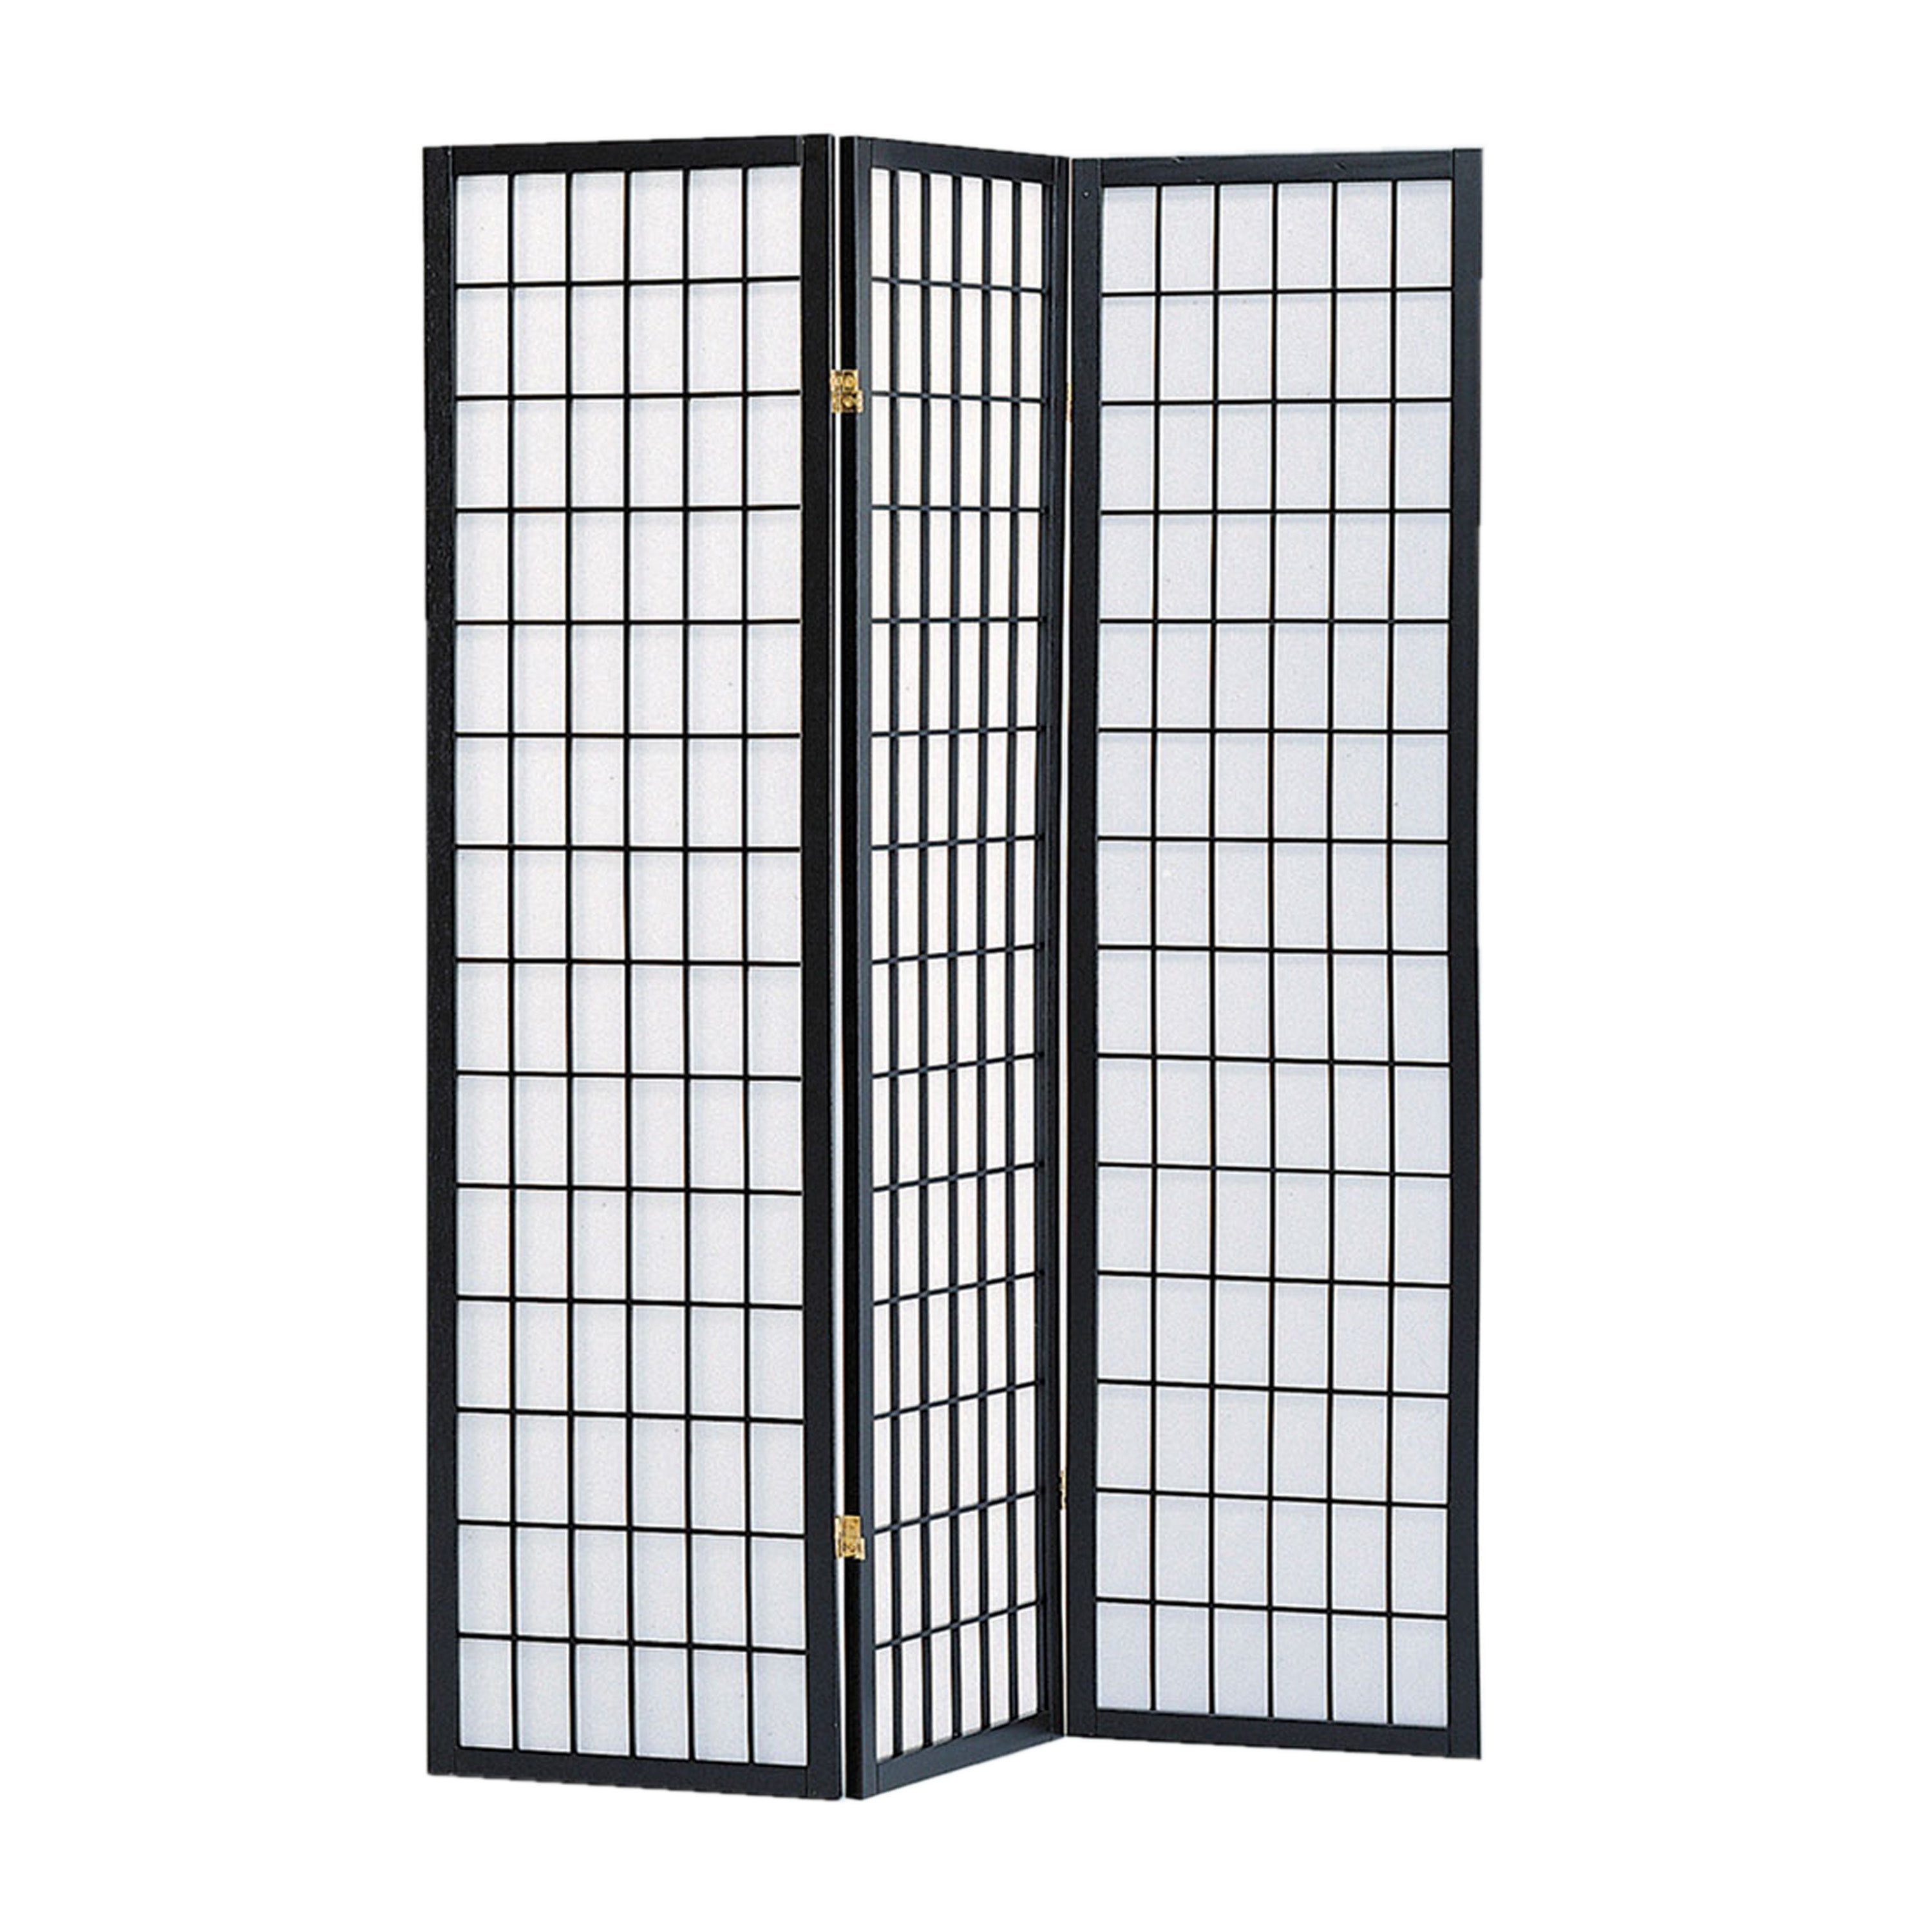 Wooden 3 Panel Room Divider with Shoji Paper Inserts, Black and White